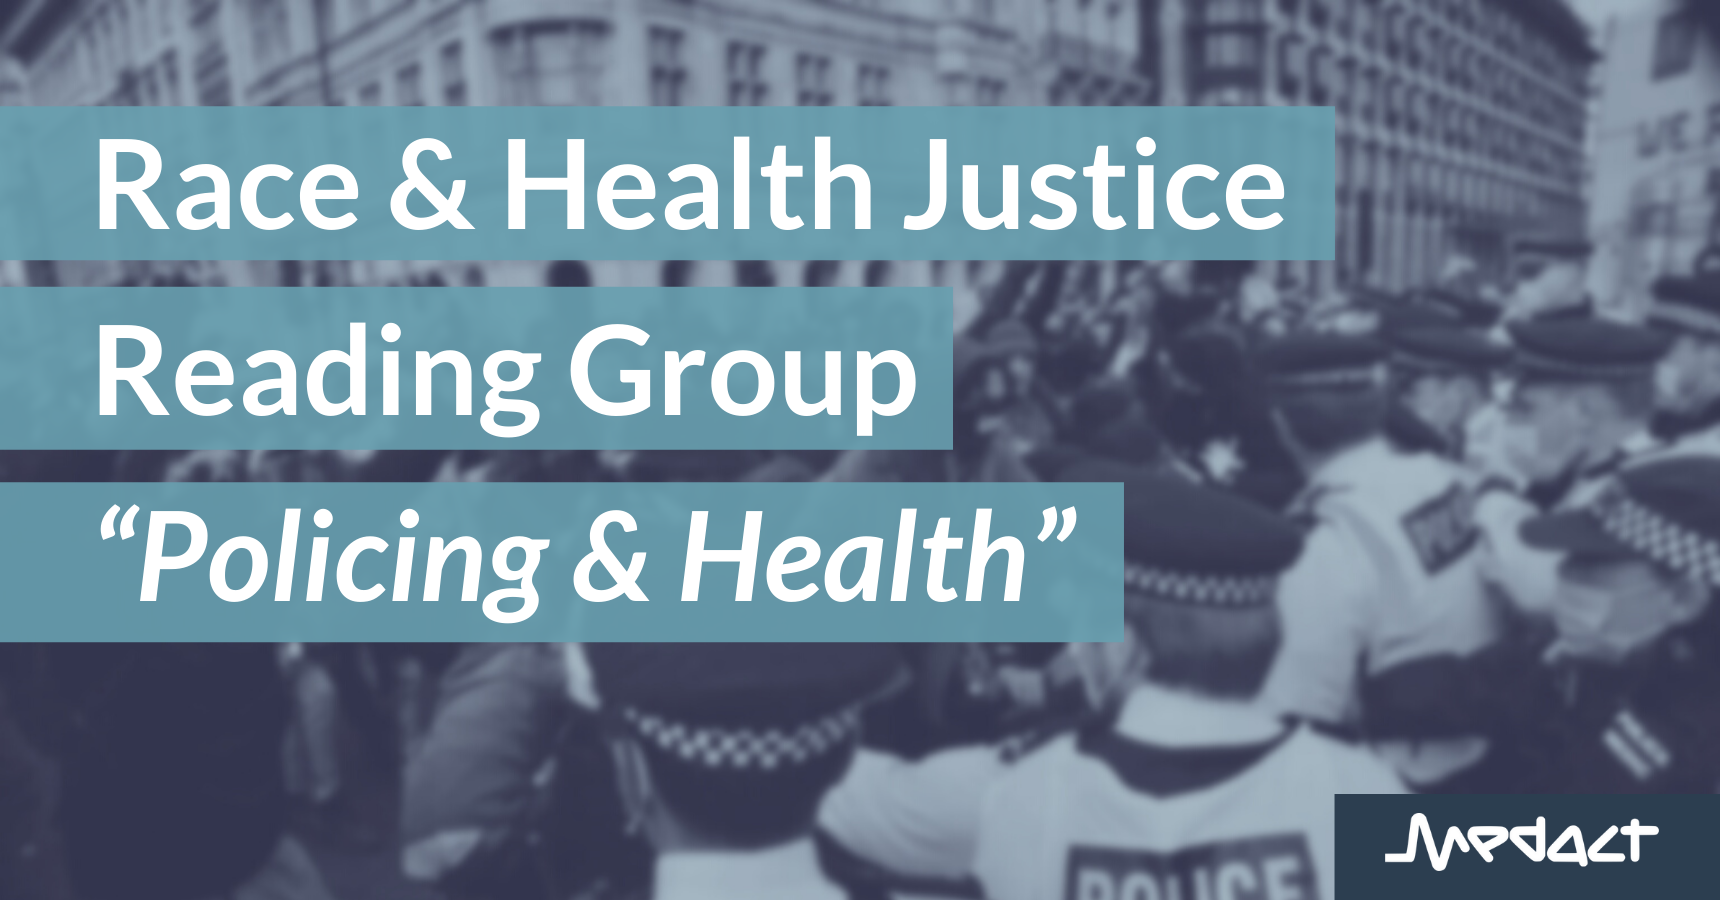 Race & Health Justice Reading Group: “Policing & Health”